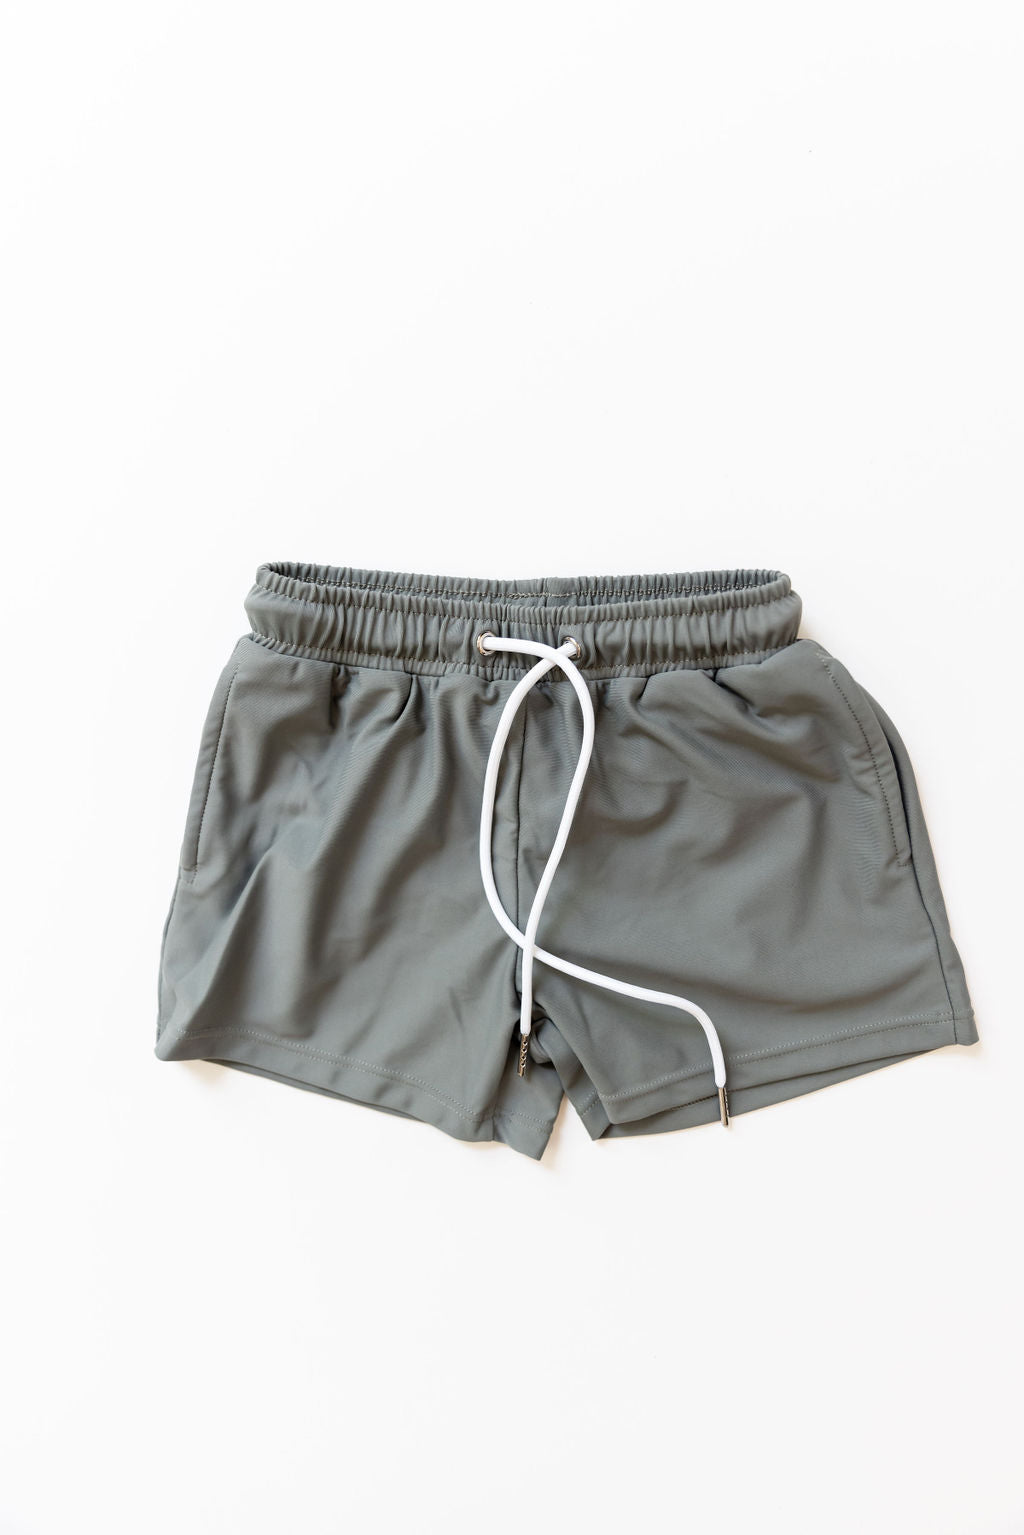 Nomad Boy Shorts In Muted Teal